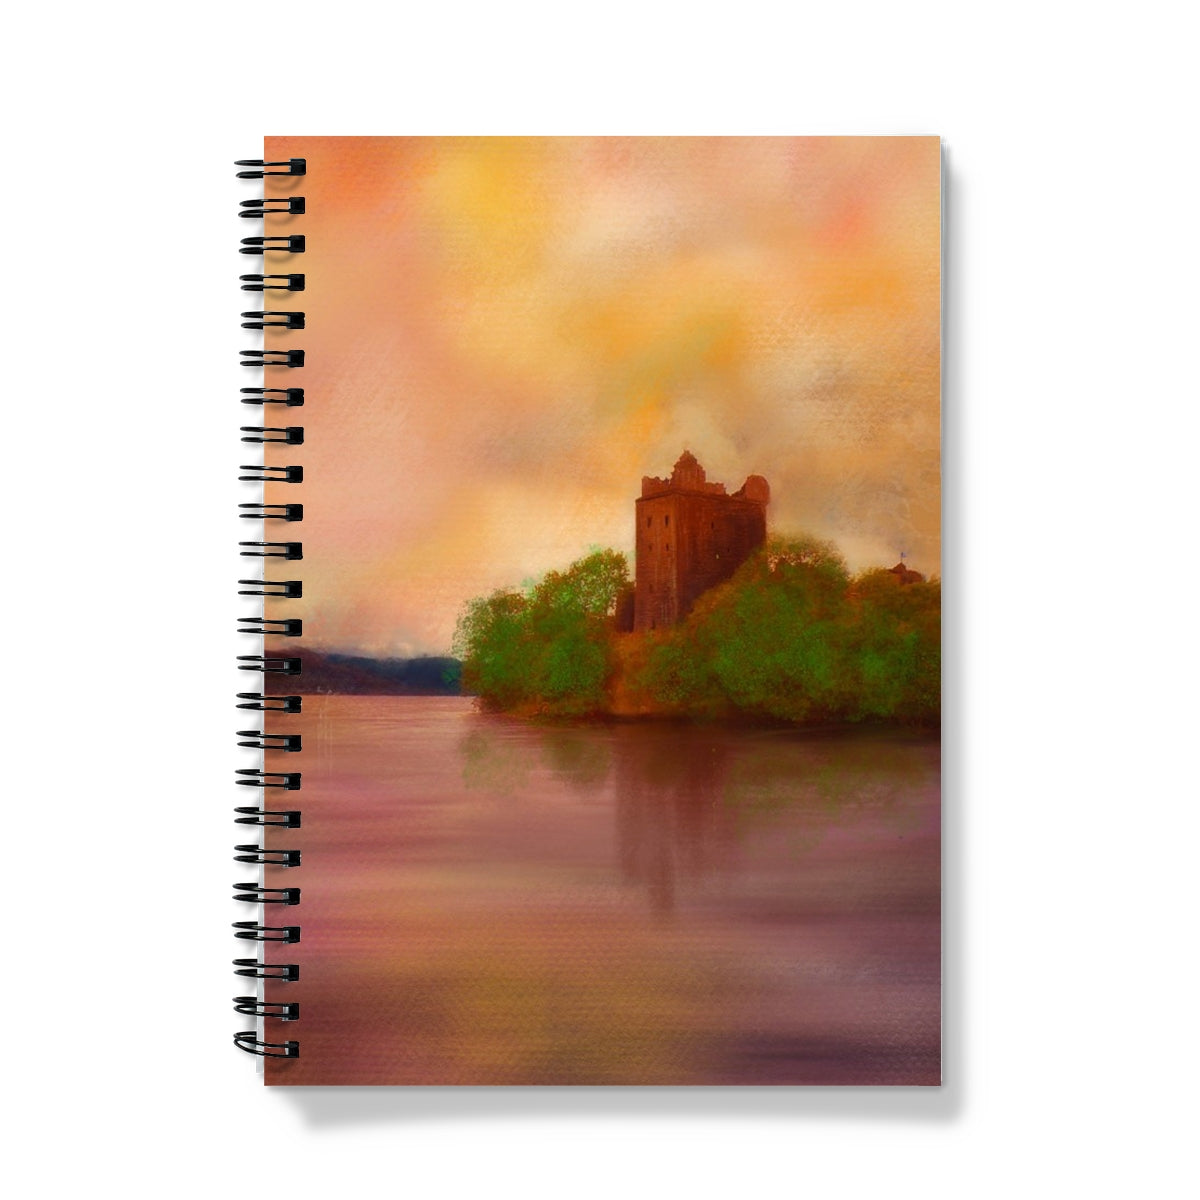 Urquhart Castle Art Gifts Notebook-Journals & Notebooks-Historic & Iconic Scotland Art Gallery-A4-Lined-Paintings, Prints, Homeware, Art Gifts From Scotland By Scottish Artist Kevin Hunter